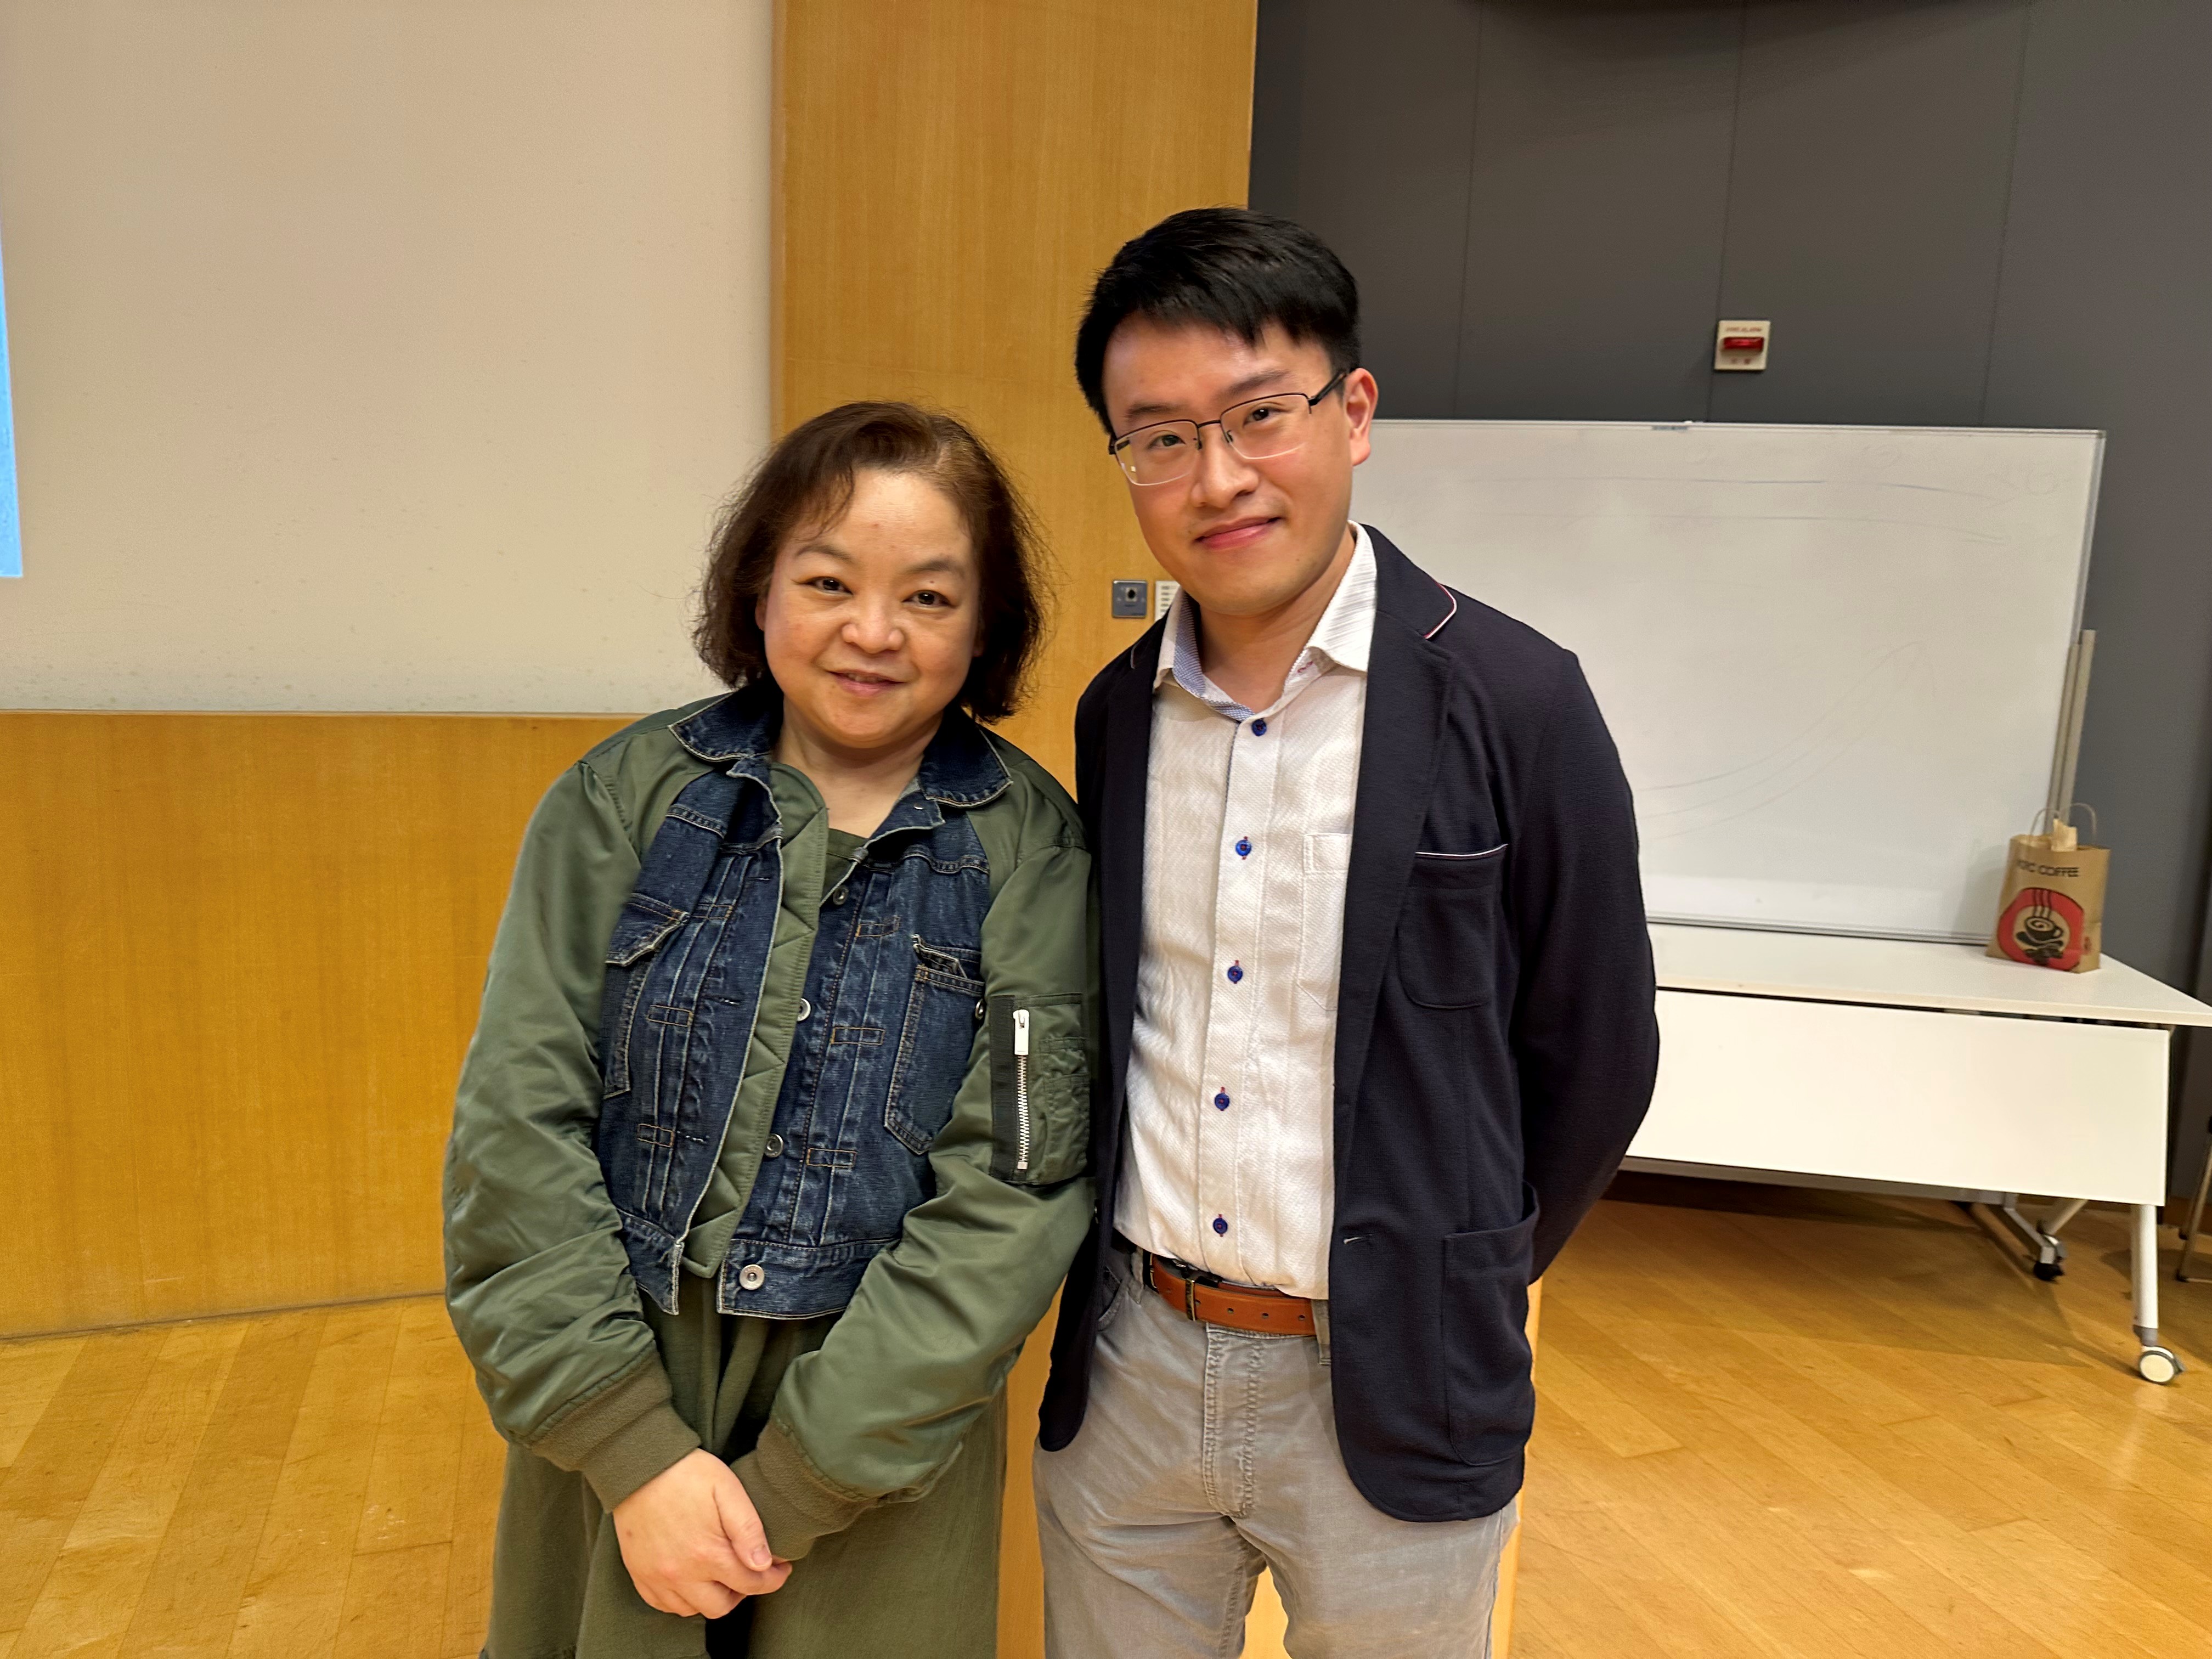 Dr Law and Prof Lau.jpg